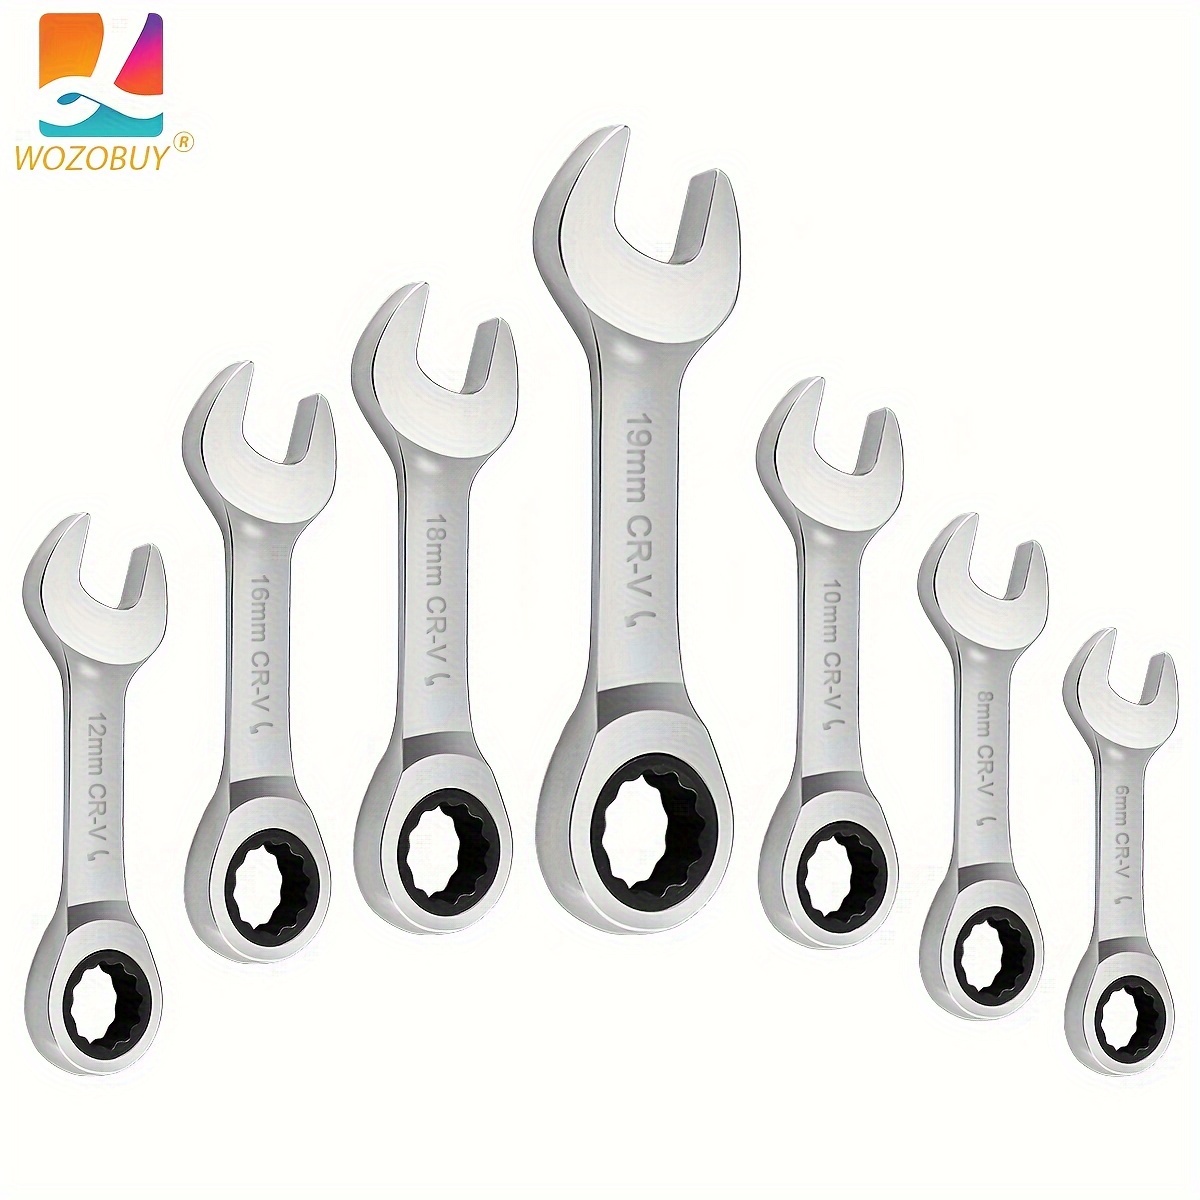 

14pcs Ratcheting Wrench Set, Reversible Short Stubby Spanner, 72-tooth Gear, 6mm-19mm, Chrome Vanadium Steel, Durable, Multi-size